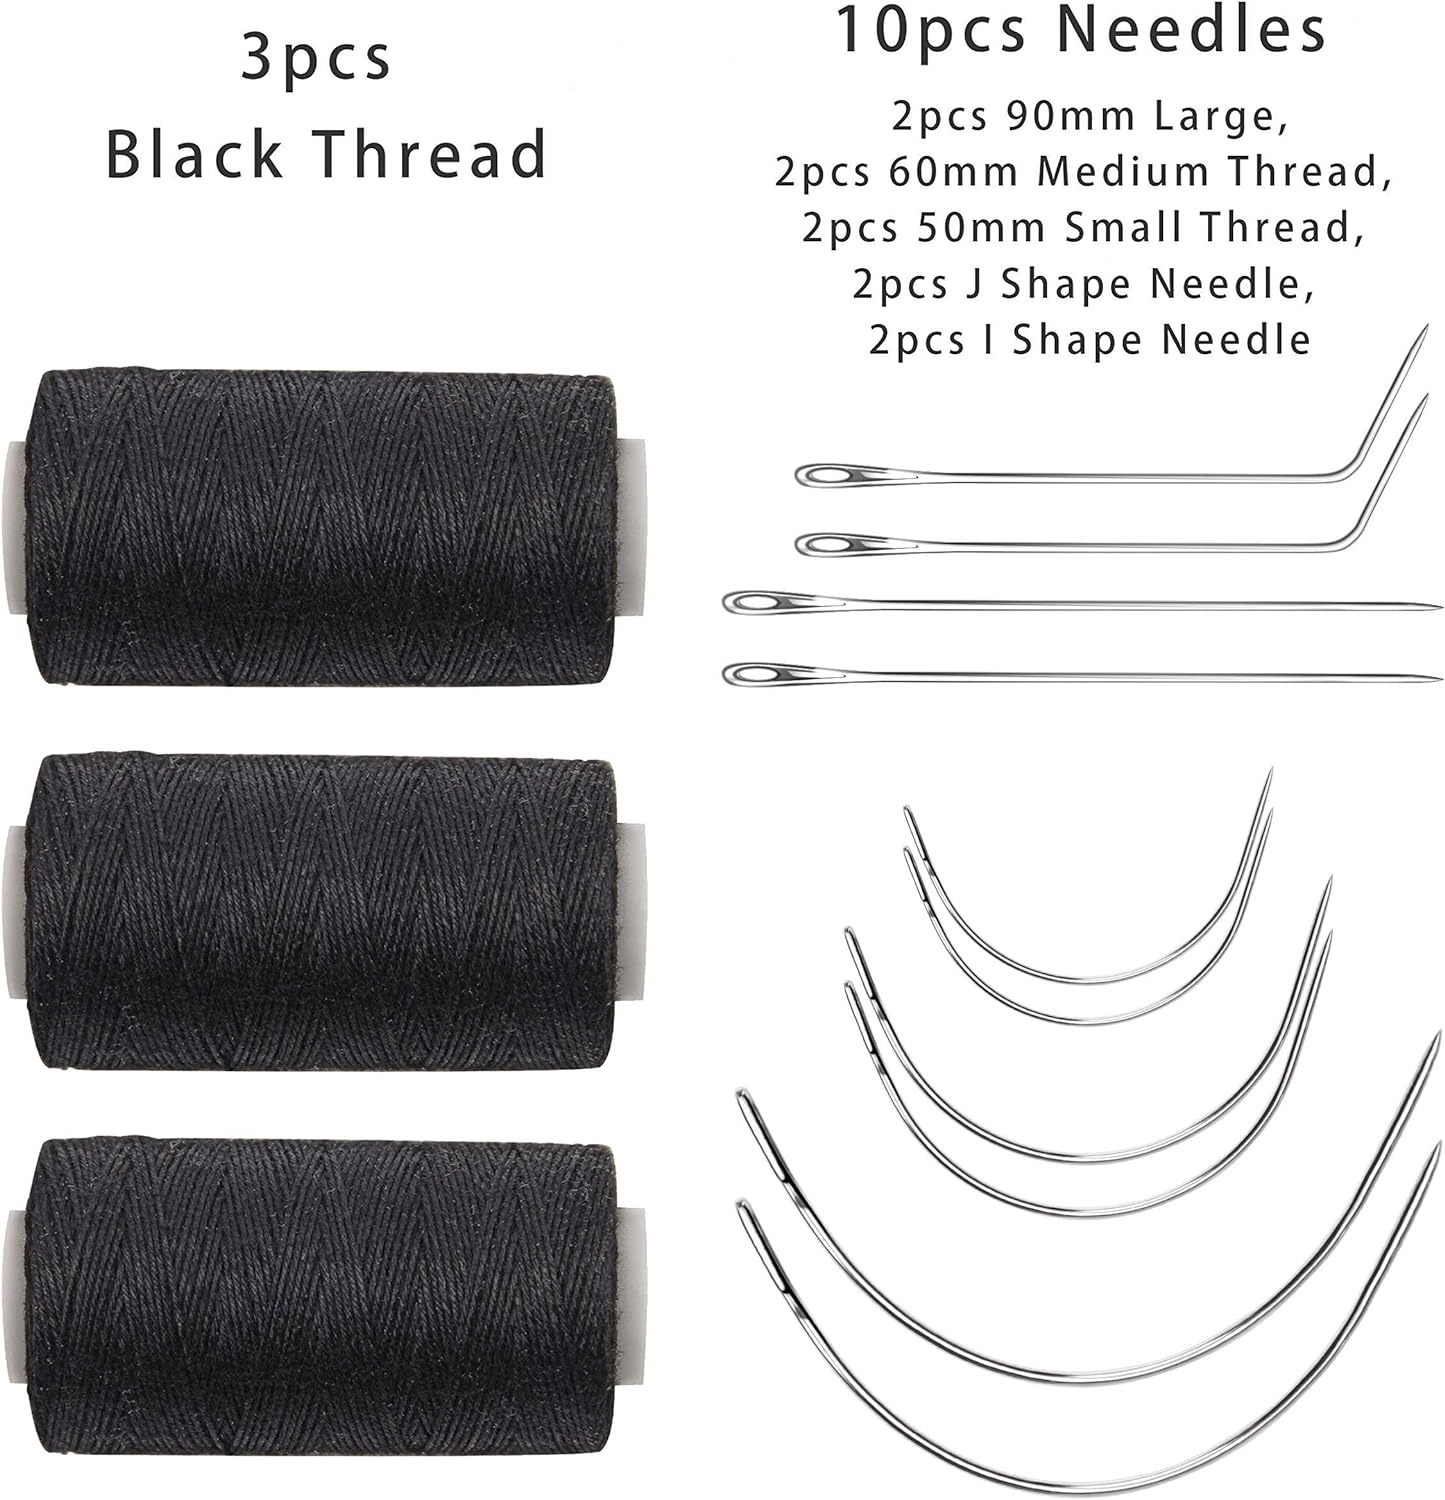 Weaving Needle Combo Deal Black Thread with 10Pcs Needle for Making Wig Sewing Hair Weft Hair Weave Extension, Big Medium and Small C J Shape Curved Needle I Needle (3 Thread Black + 10 Needle)